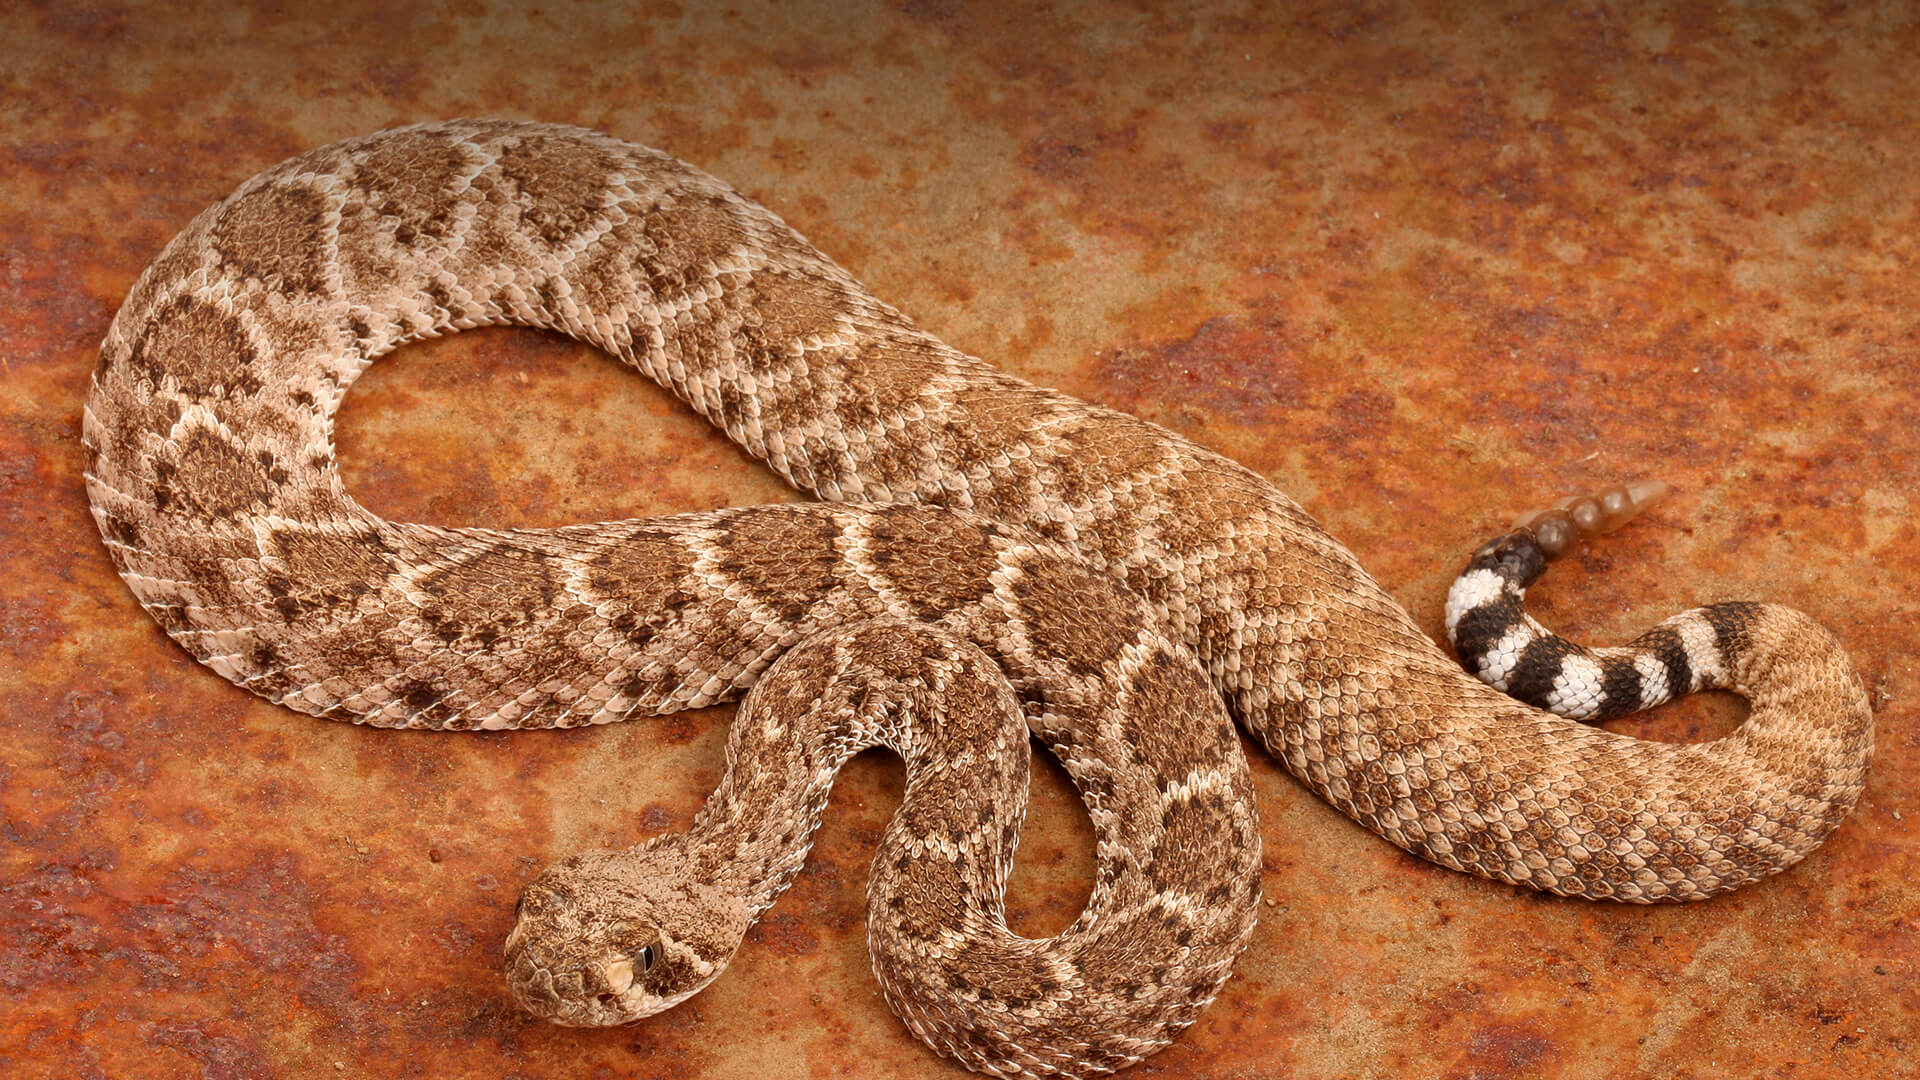 What Good Are Rattlesnakes?